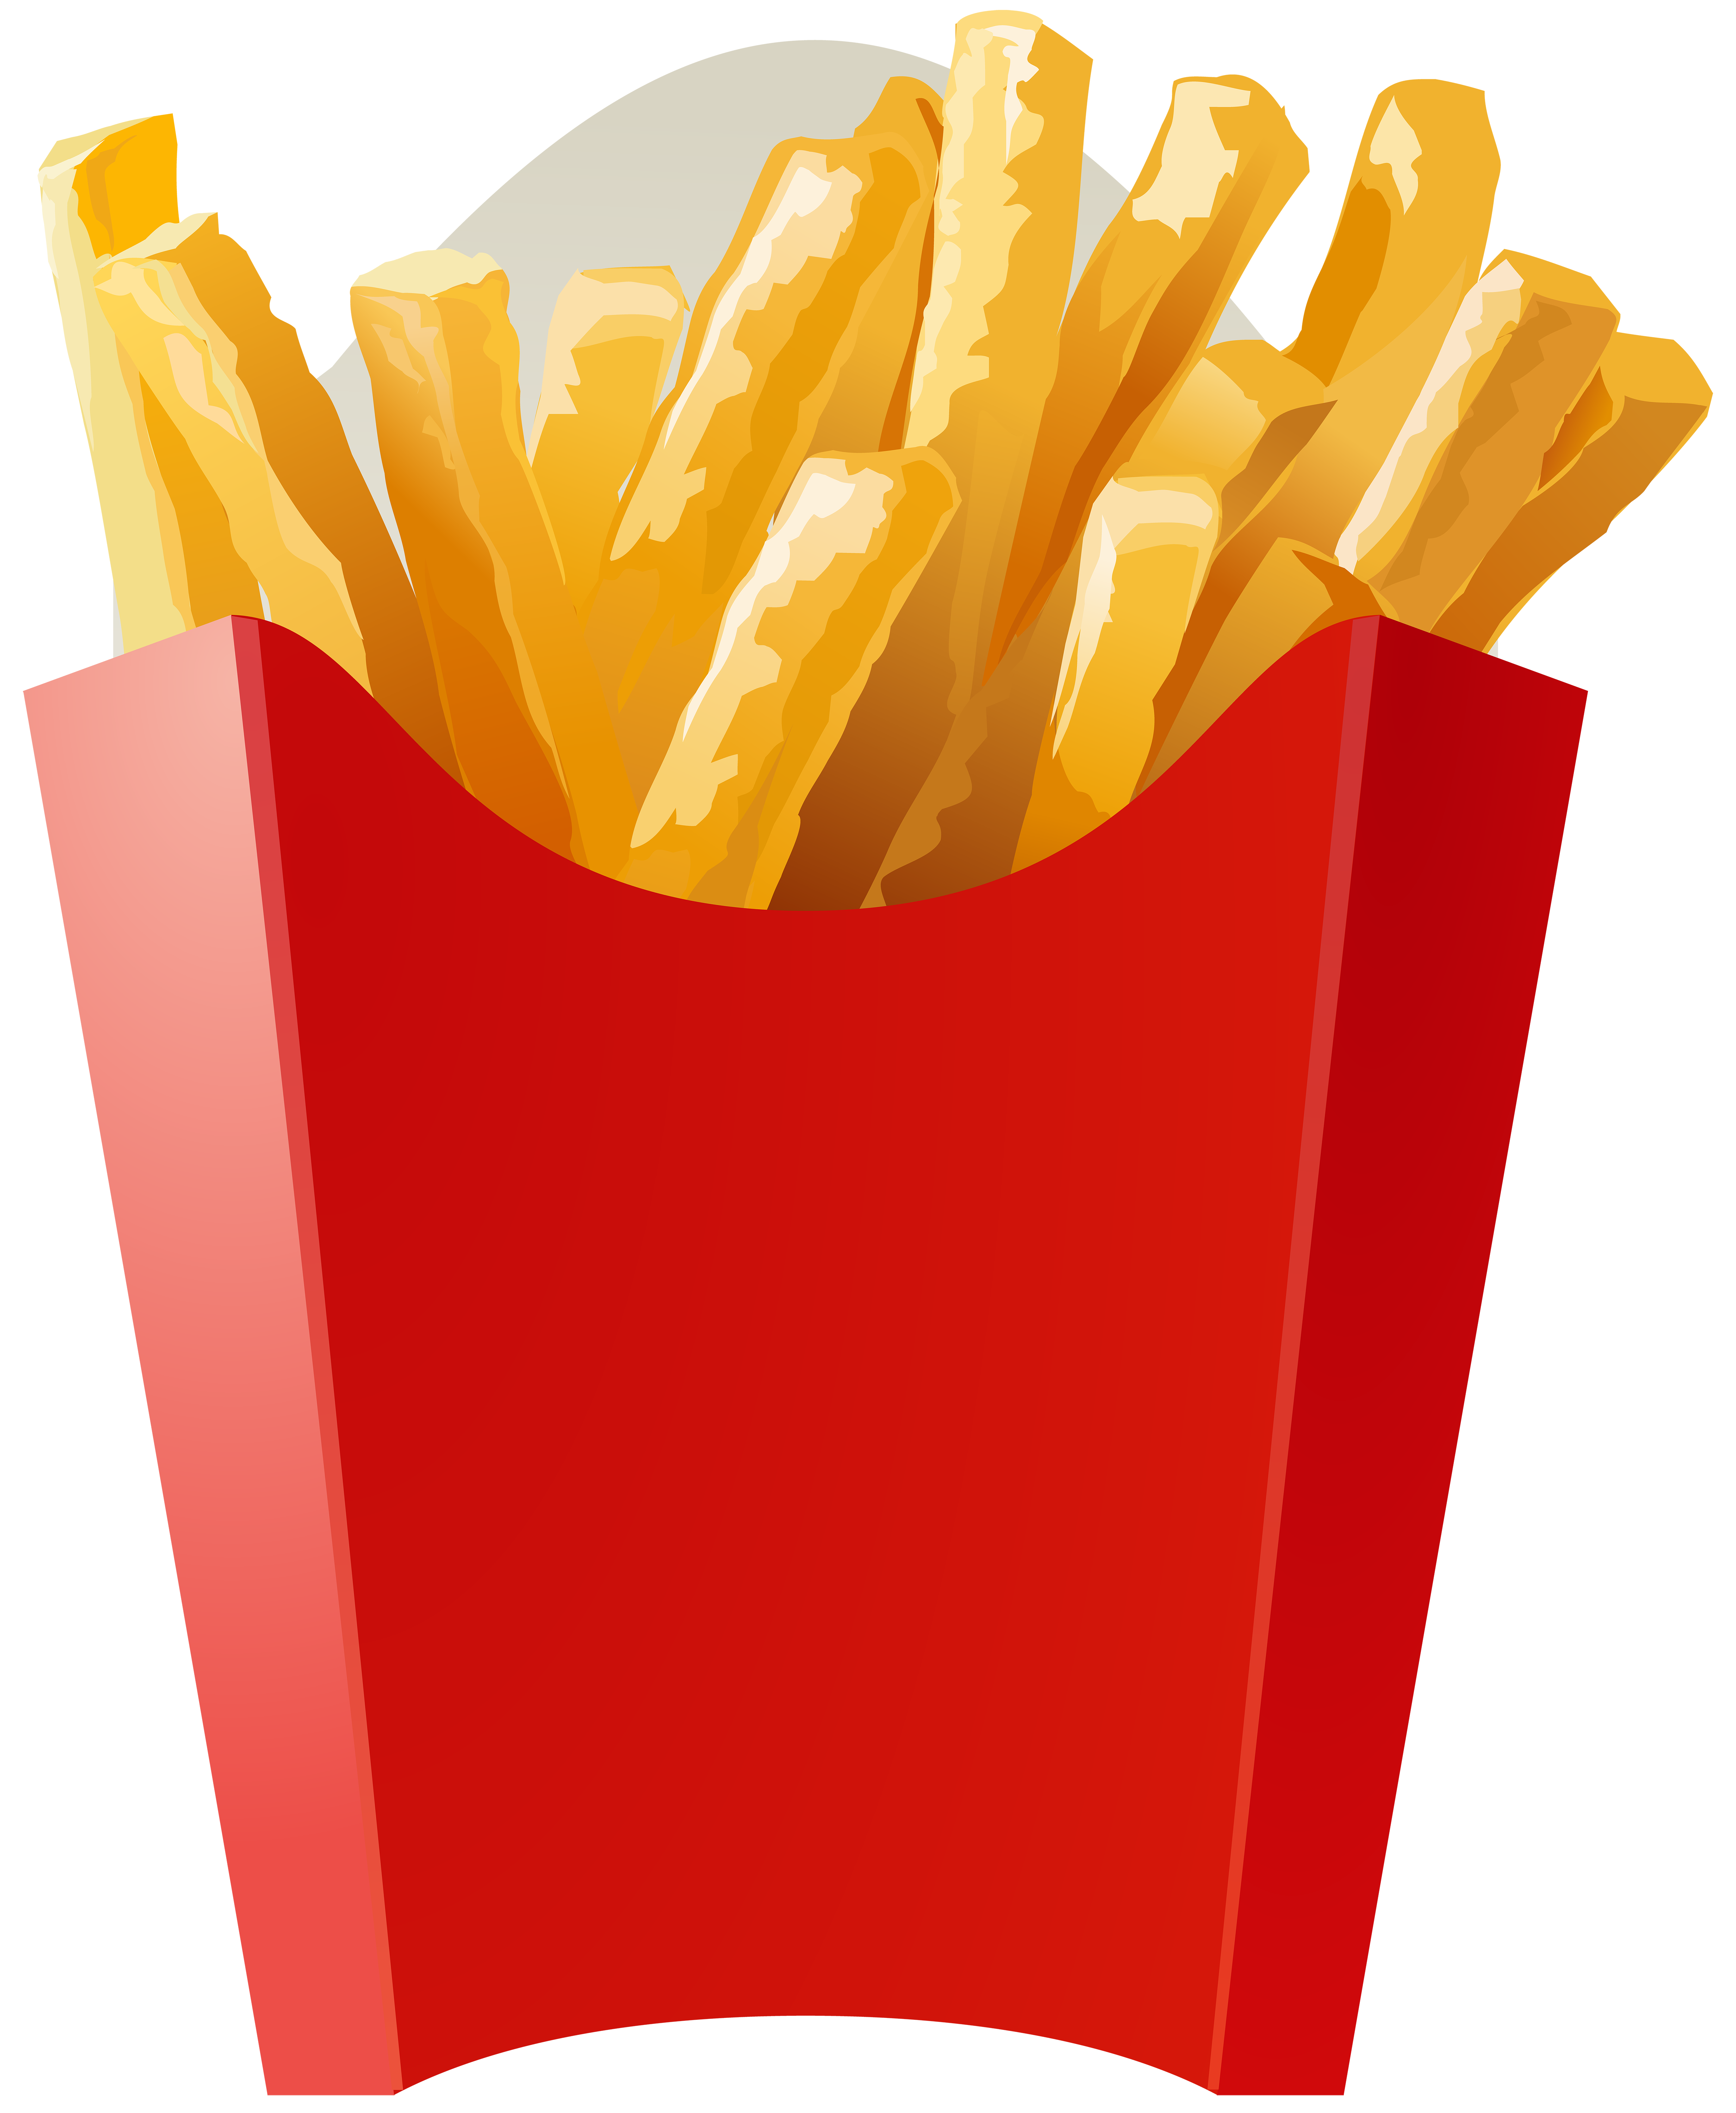 French Fries PNG Clip Art Image.